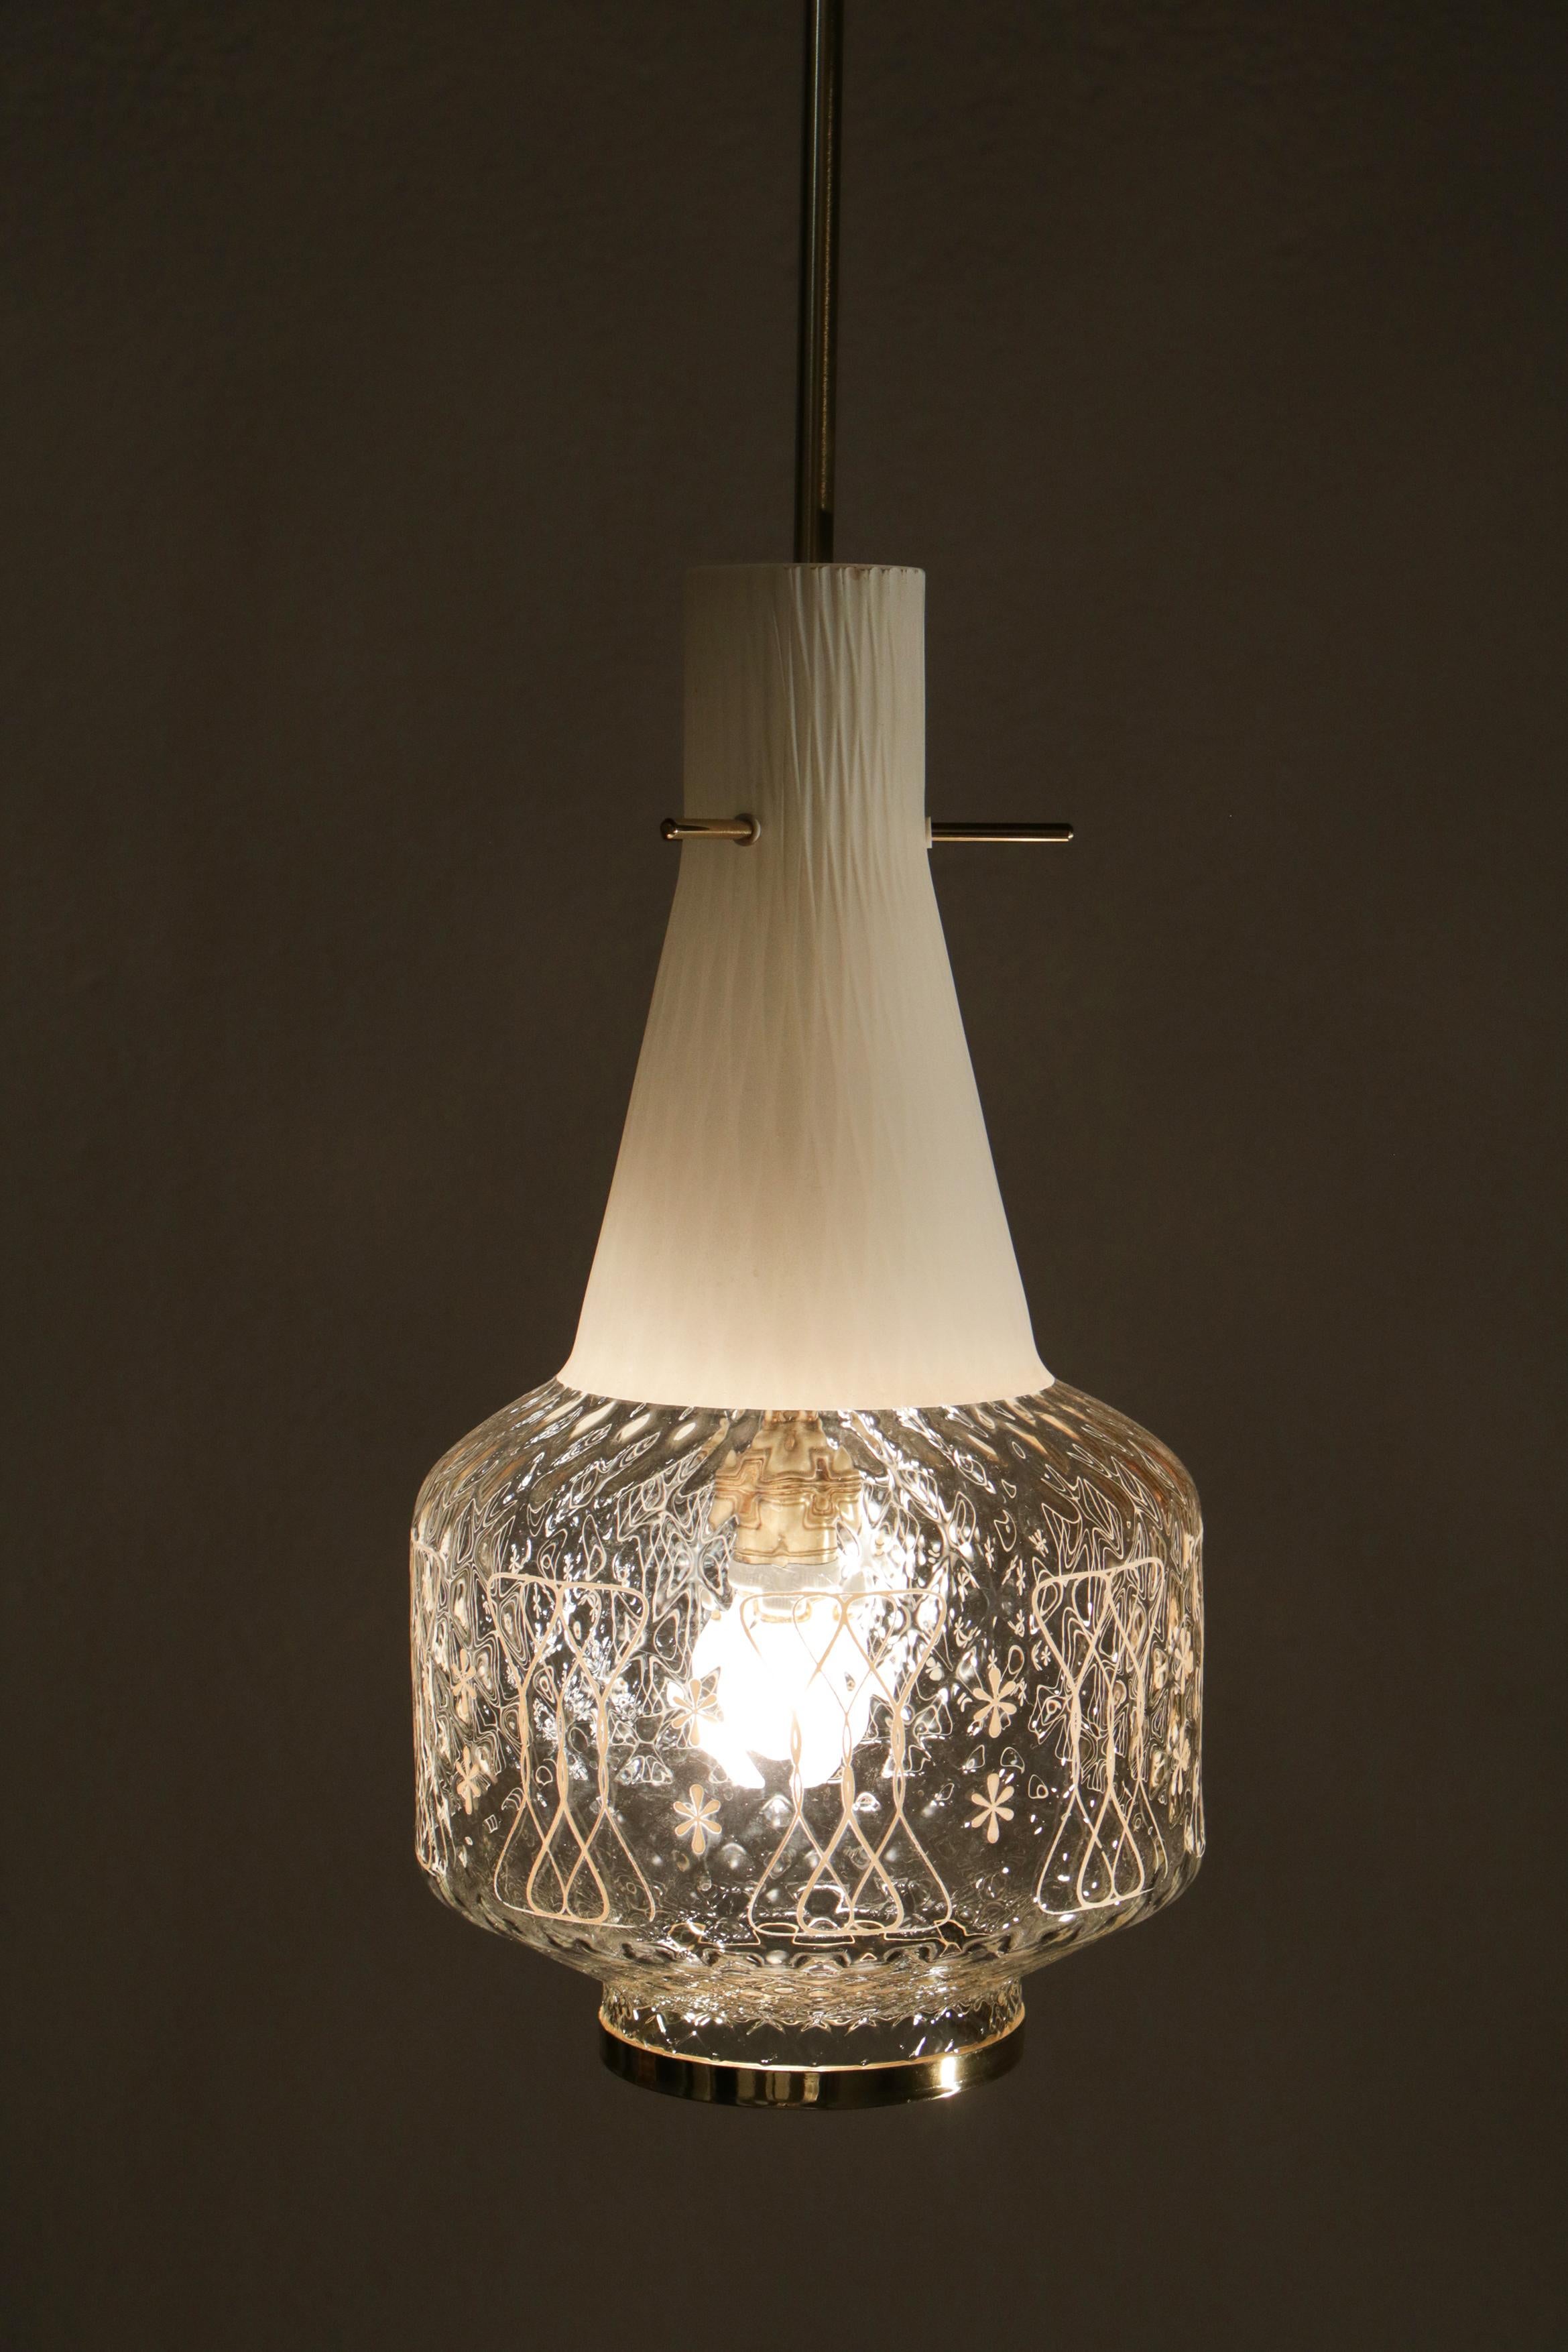 Italian Art Deco Decorative and Satin Glass Hanging Lamp, 1950s For Sale 2